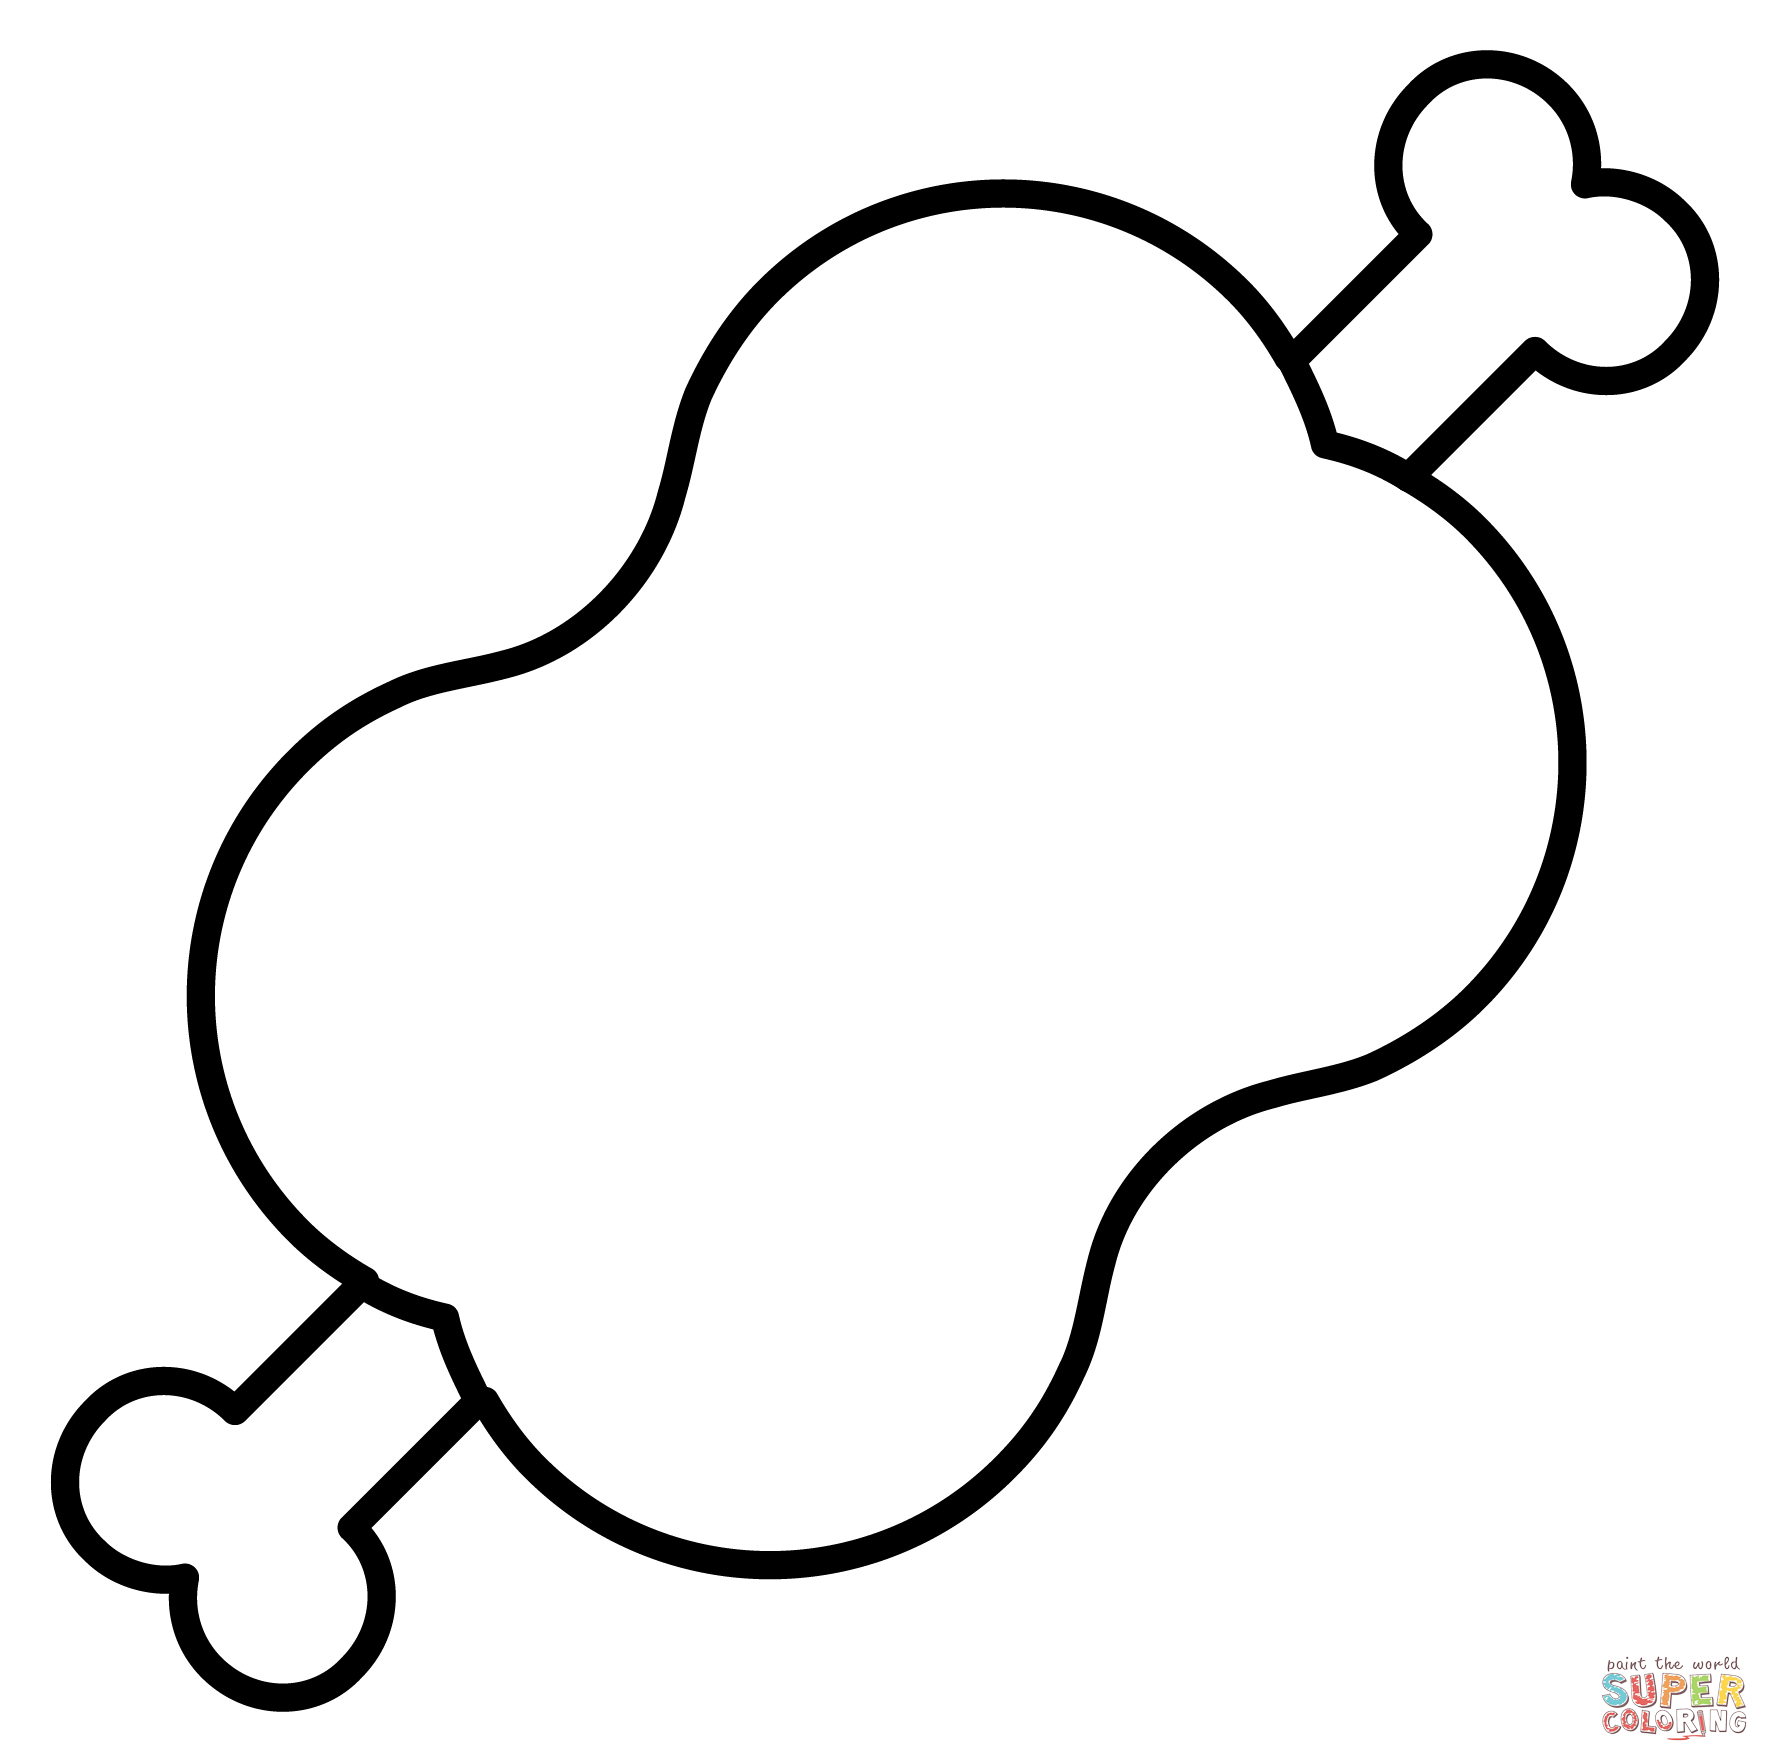 Meat on bone emoji coloring page free printable coloring pages